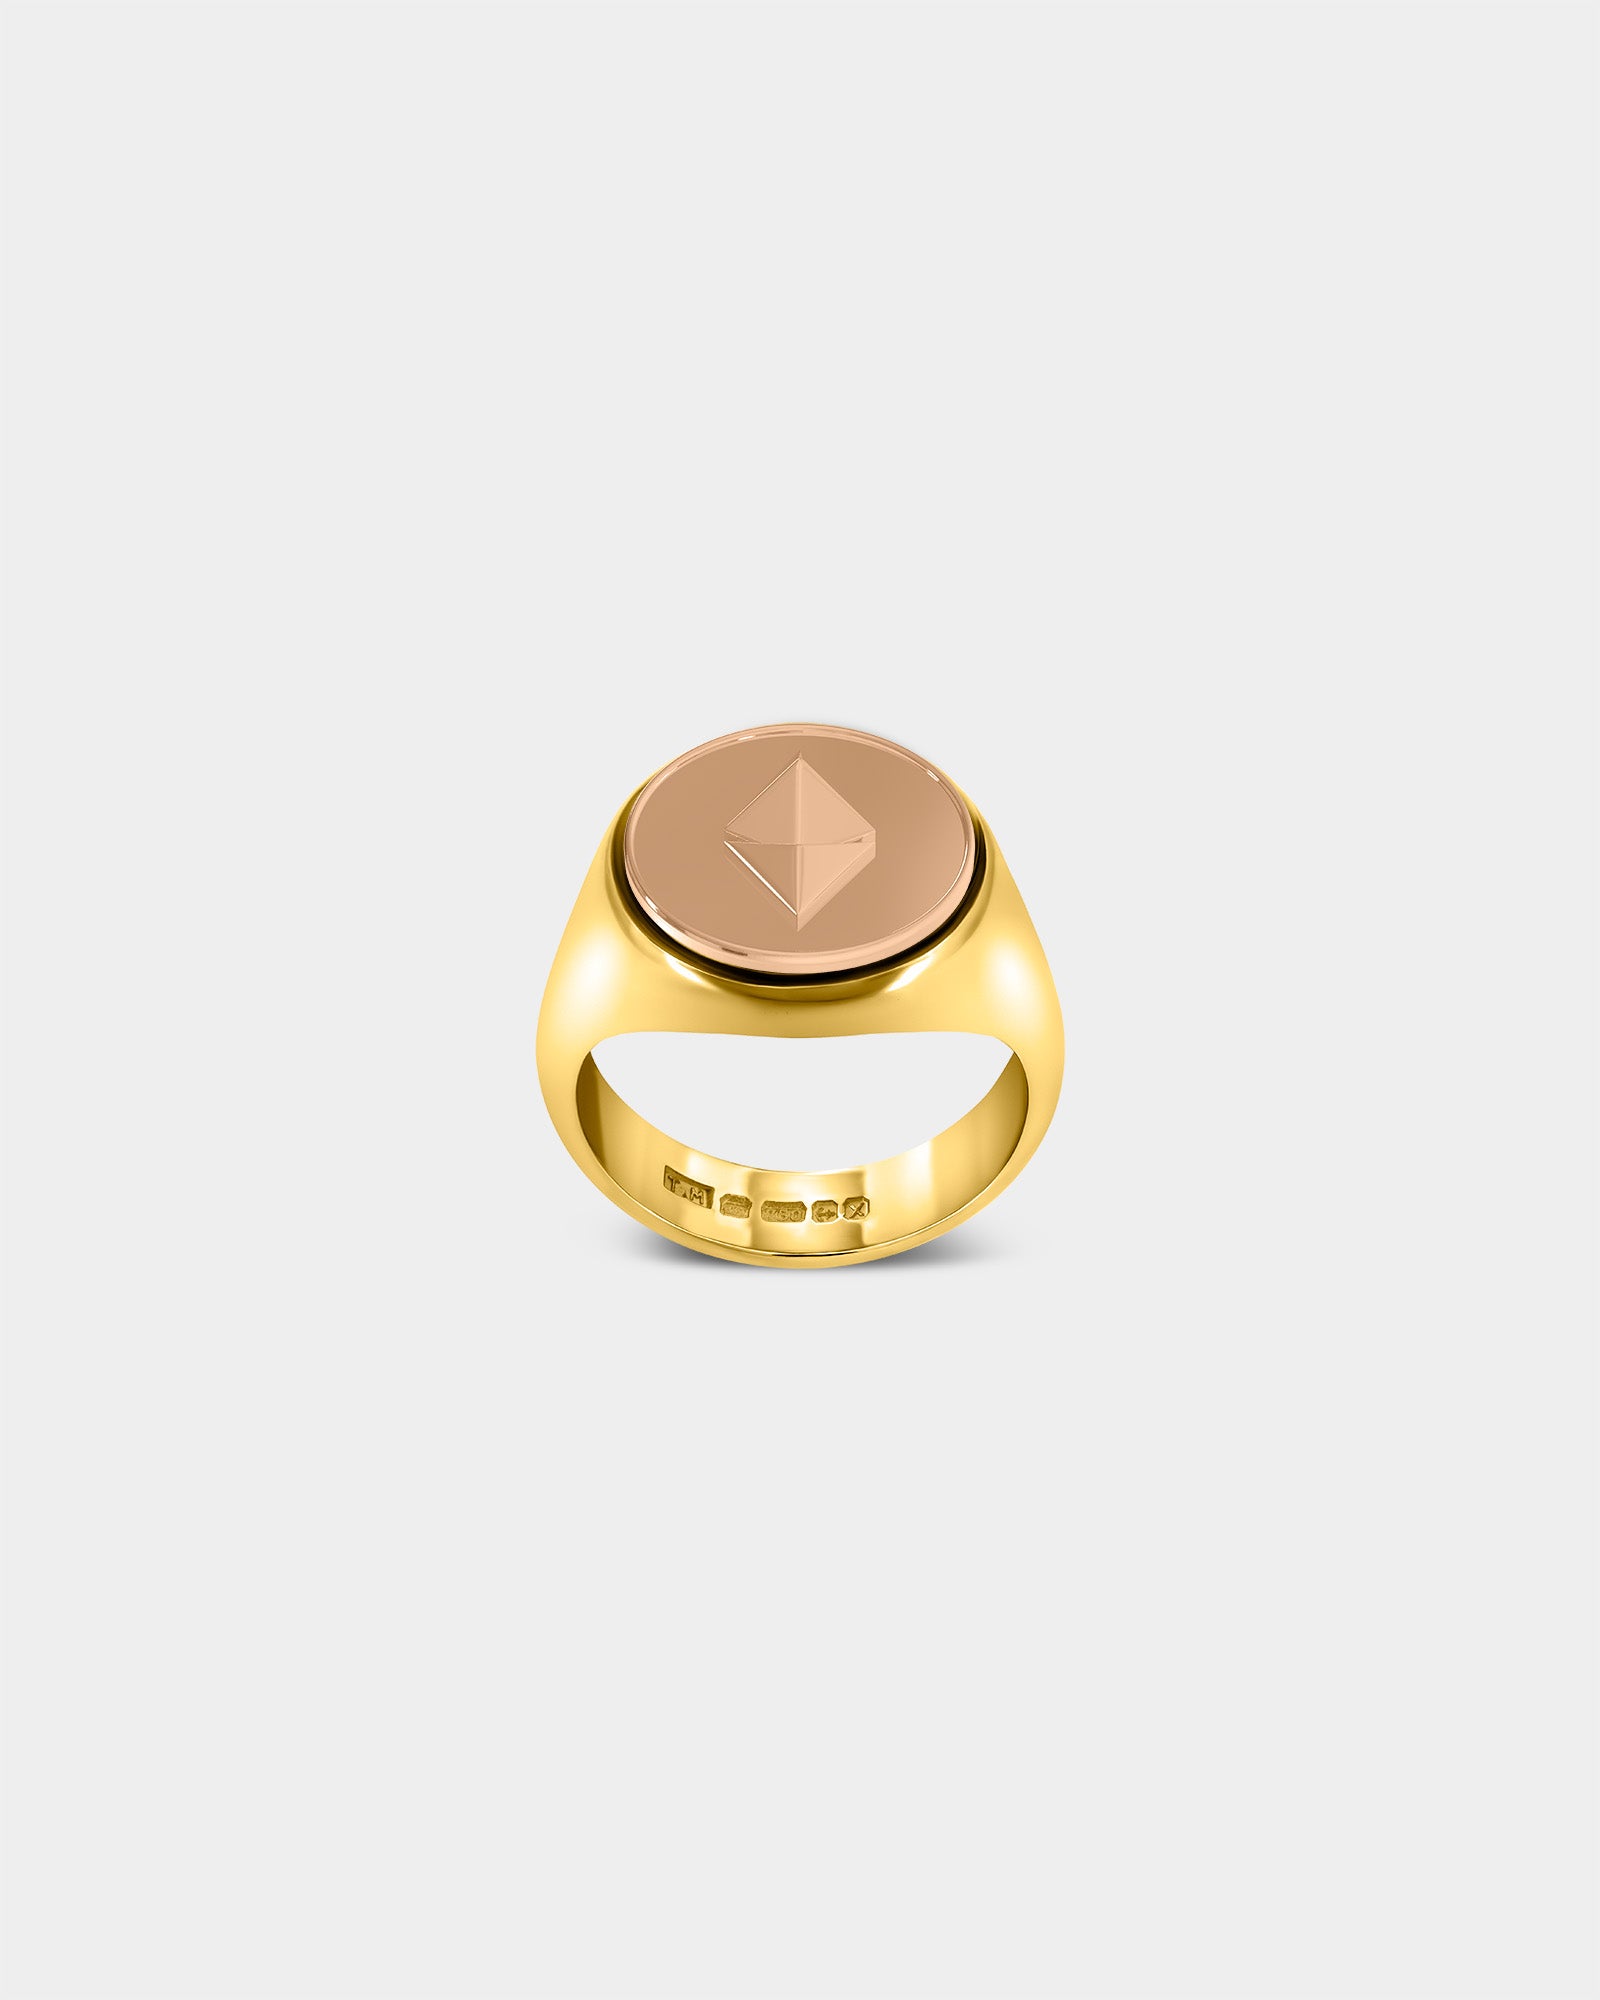 Large Ethereum Crypto Ring in 9k Yellow Gold / 9k Rose Gold by Wilson Grant